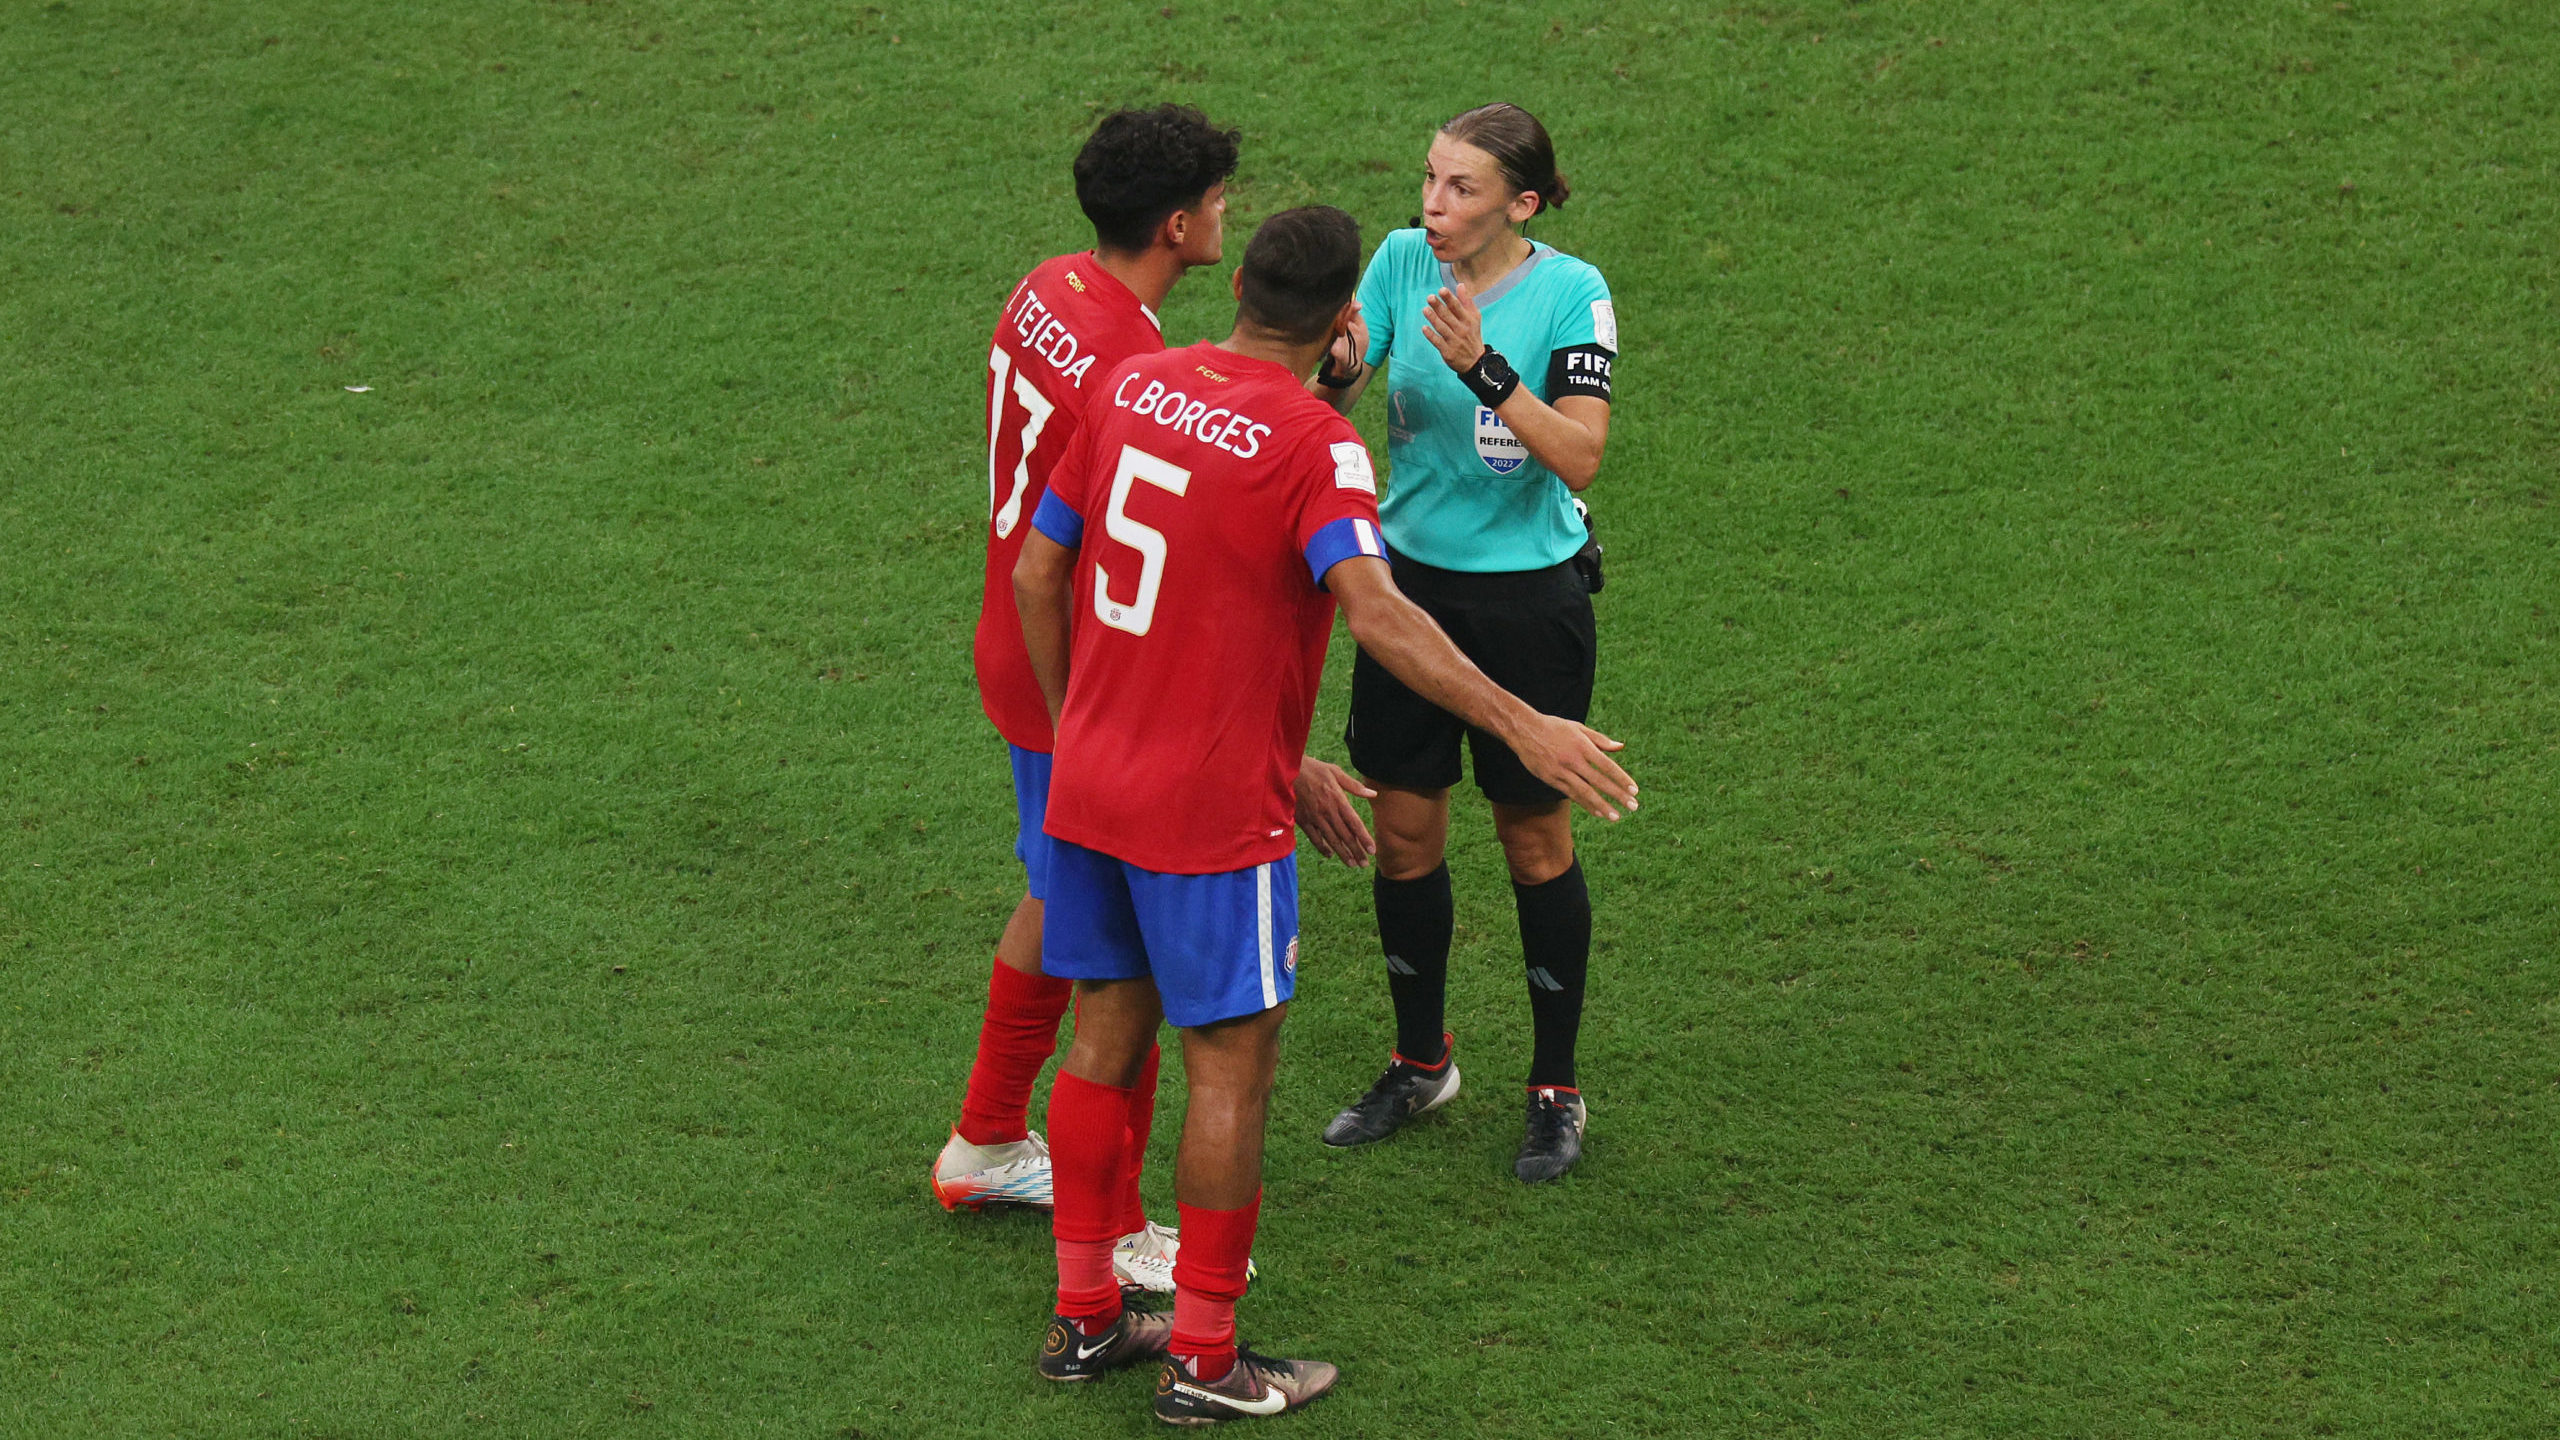 For the first time in history, a woman has taken to the field as a referee during World Cup soccer....